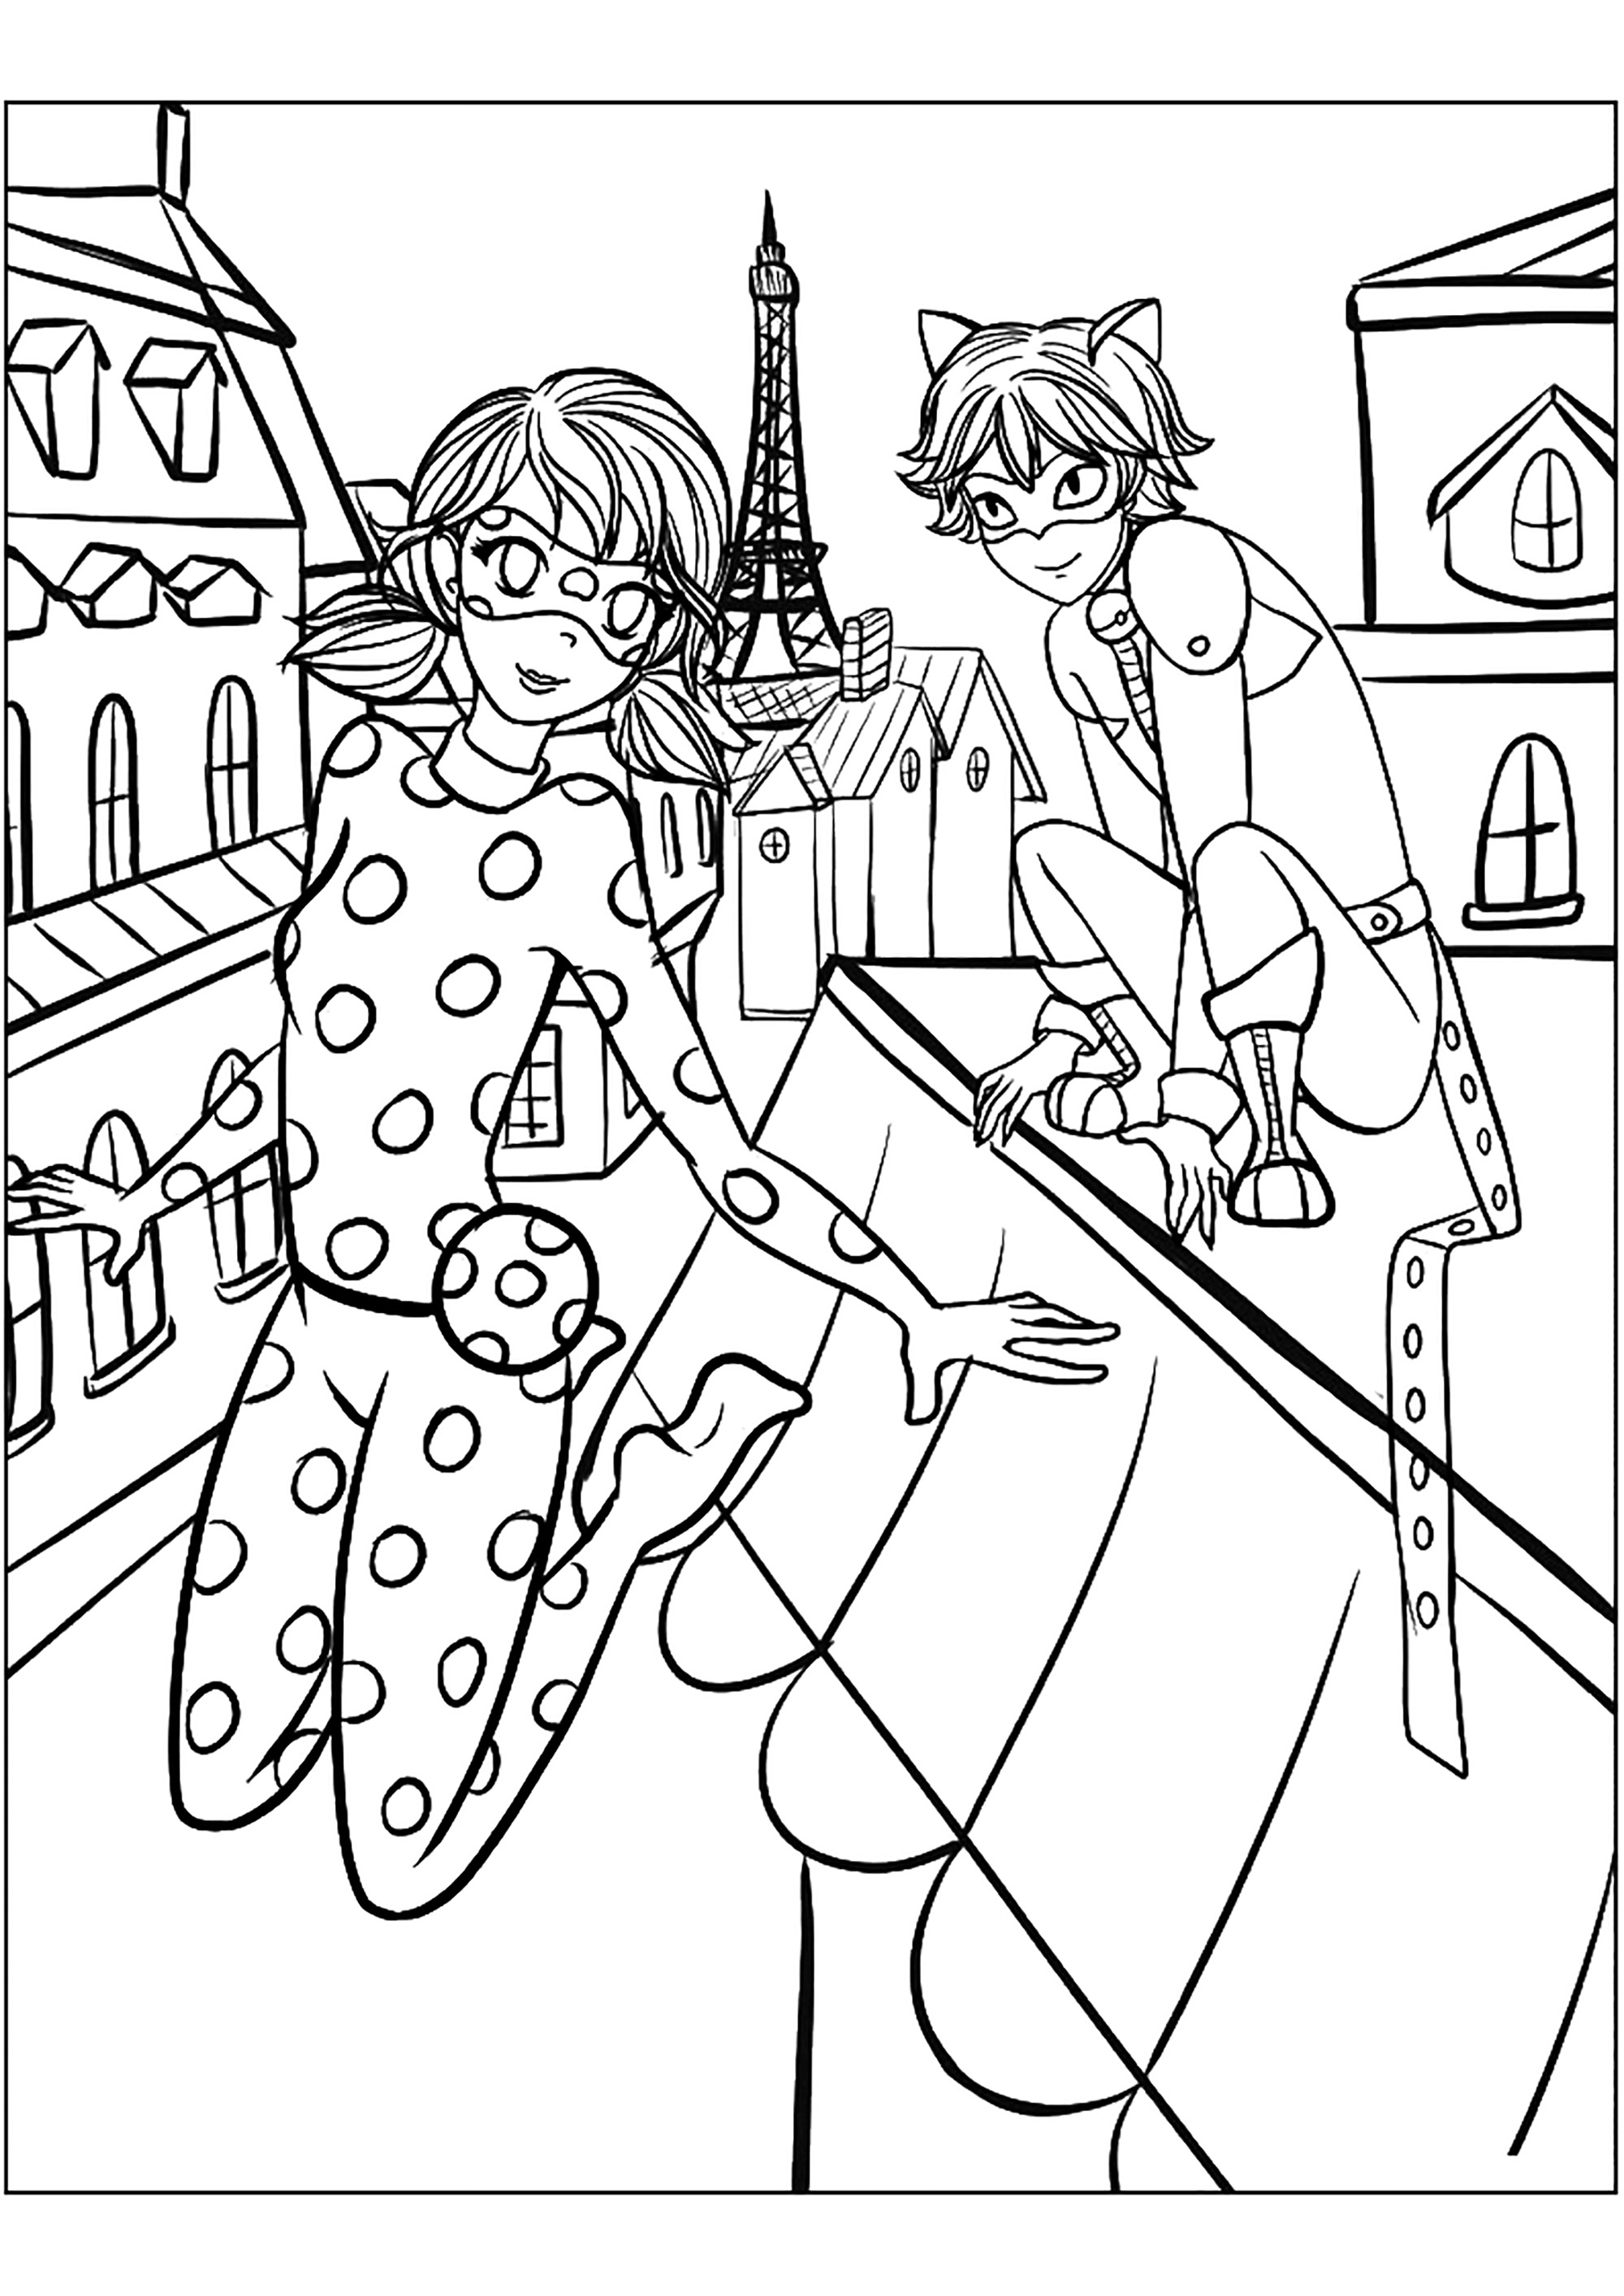 Download Miraculous Lady Bug Free To Color For Children Miraculous Ladybug Kids Coloring Pages